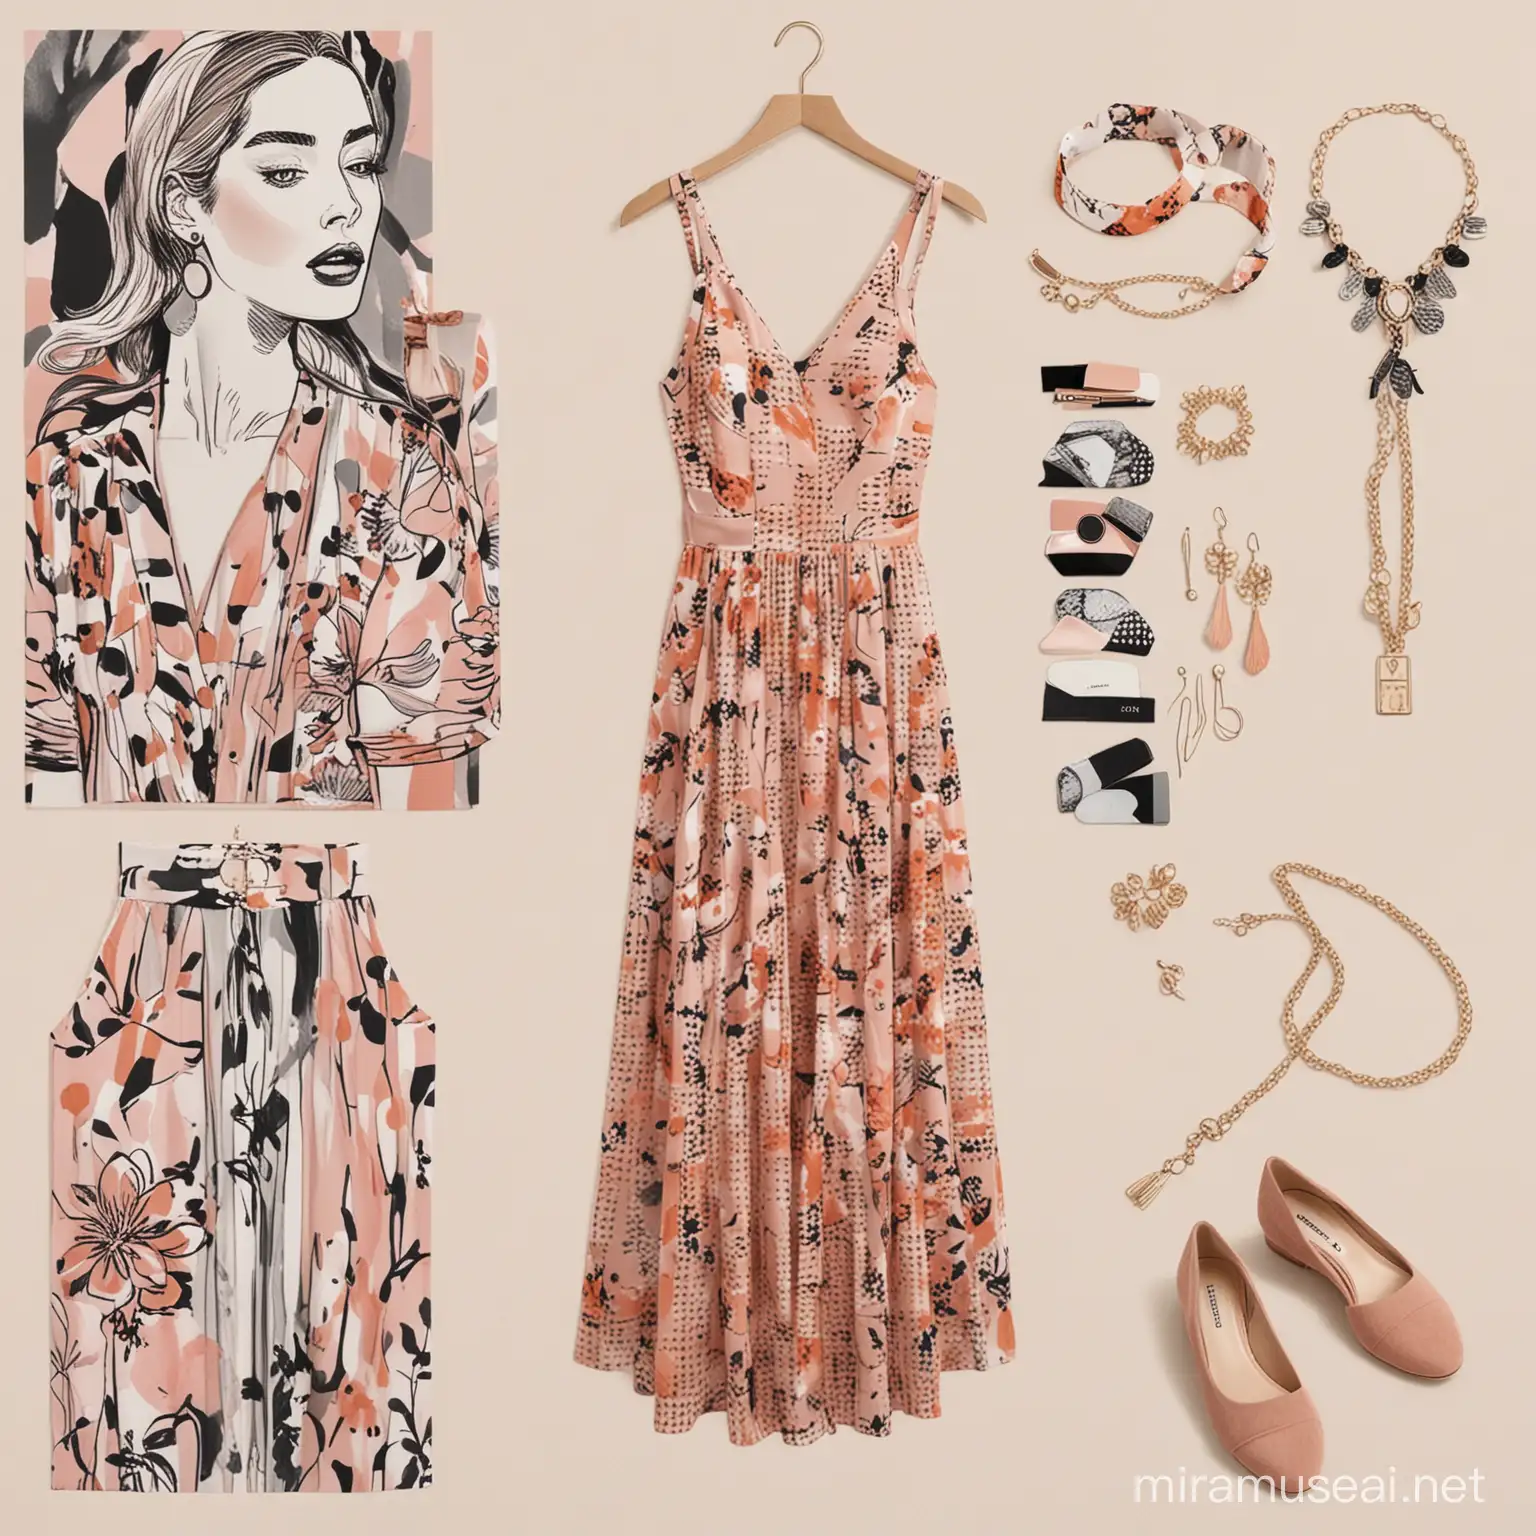 create a styling tips board in fashion illustration with accessories option  for women  with abstract floral print midaxi dress 